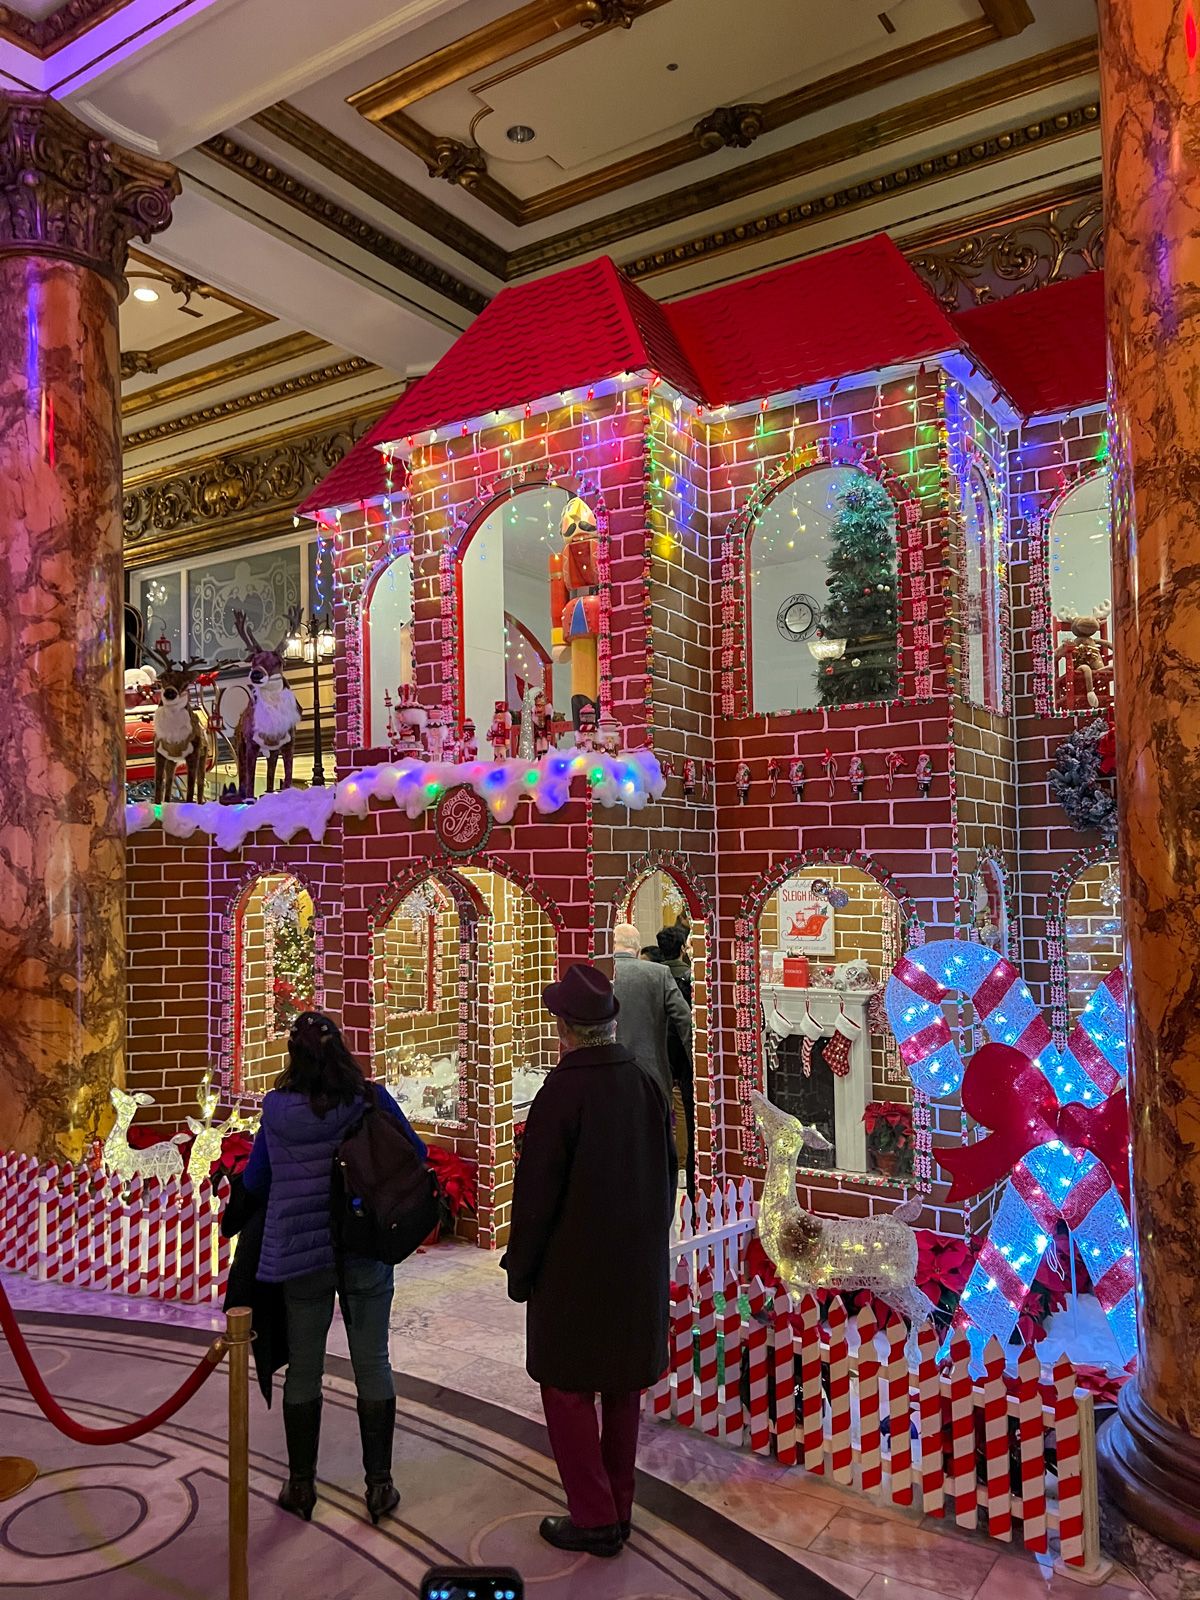 Gingerbread House & Holiday Festivities at Fairmont San Francisco